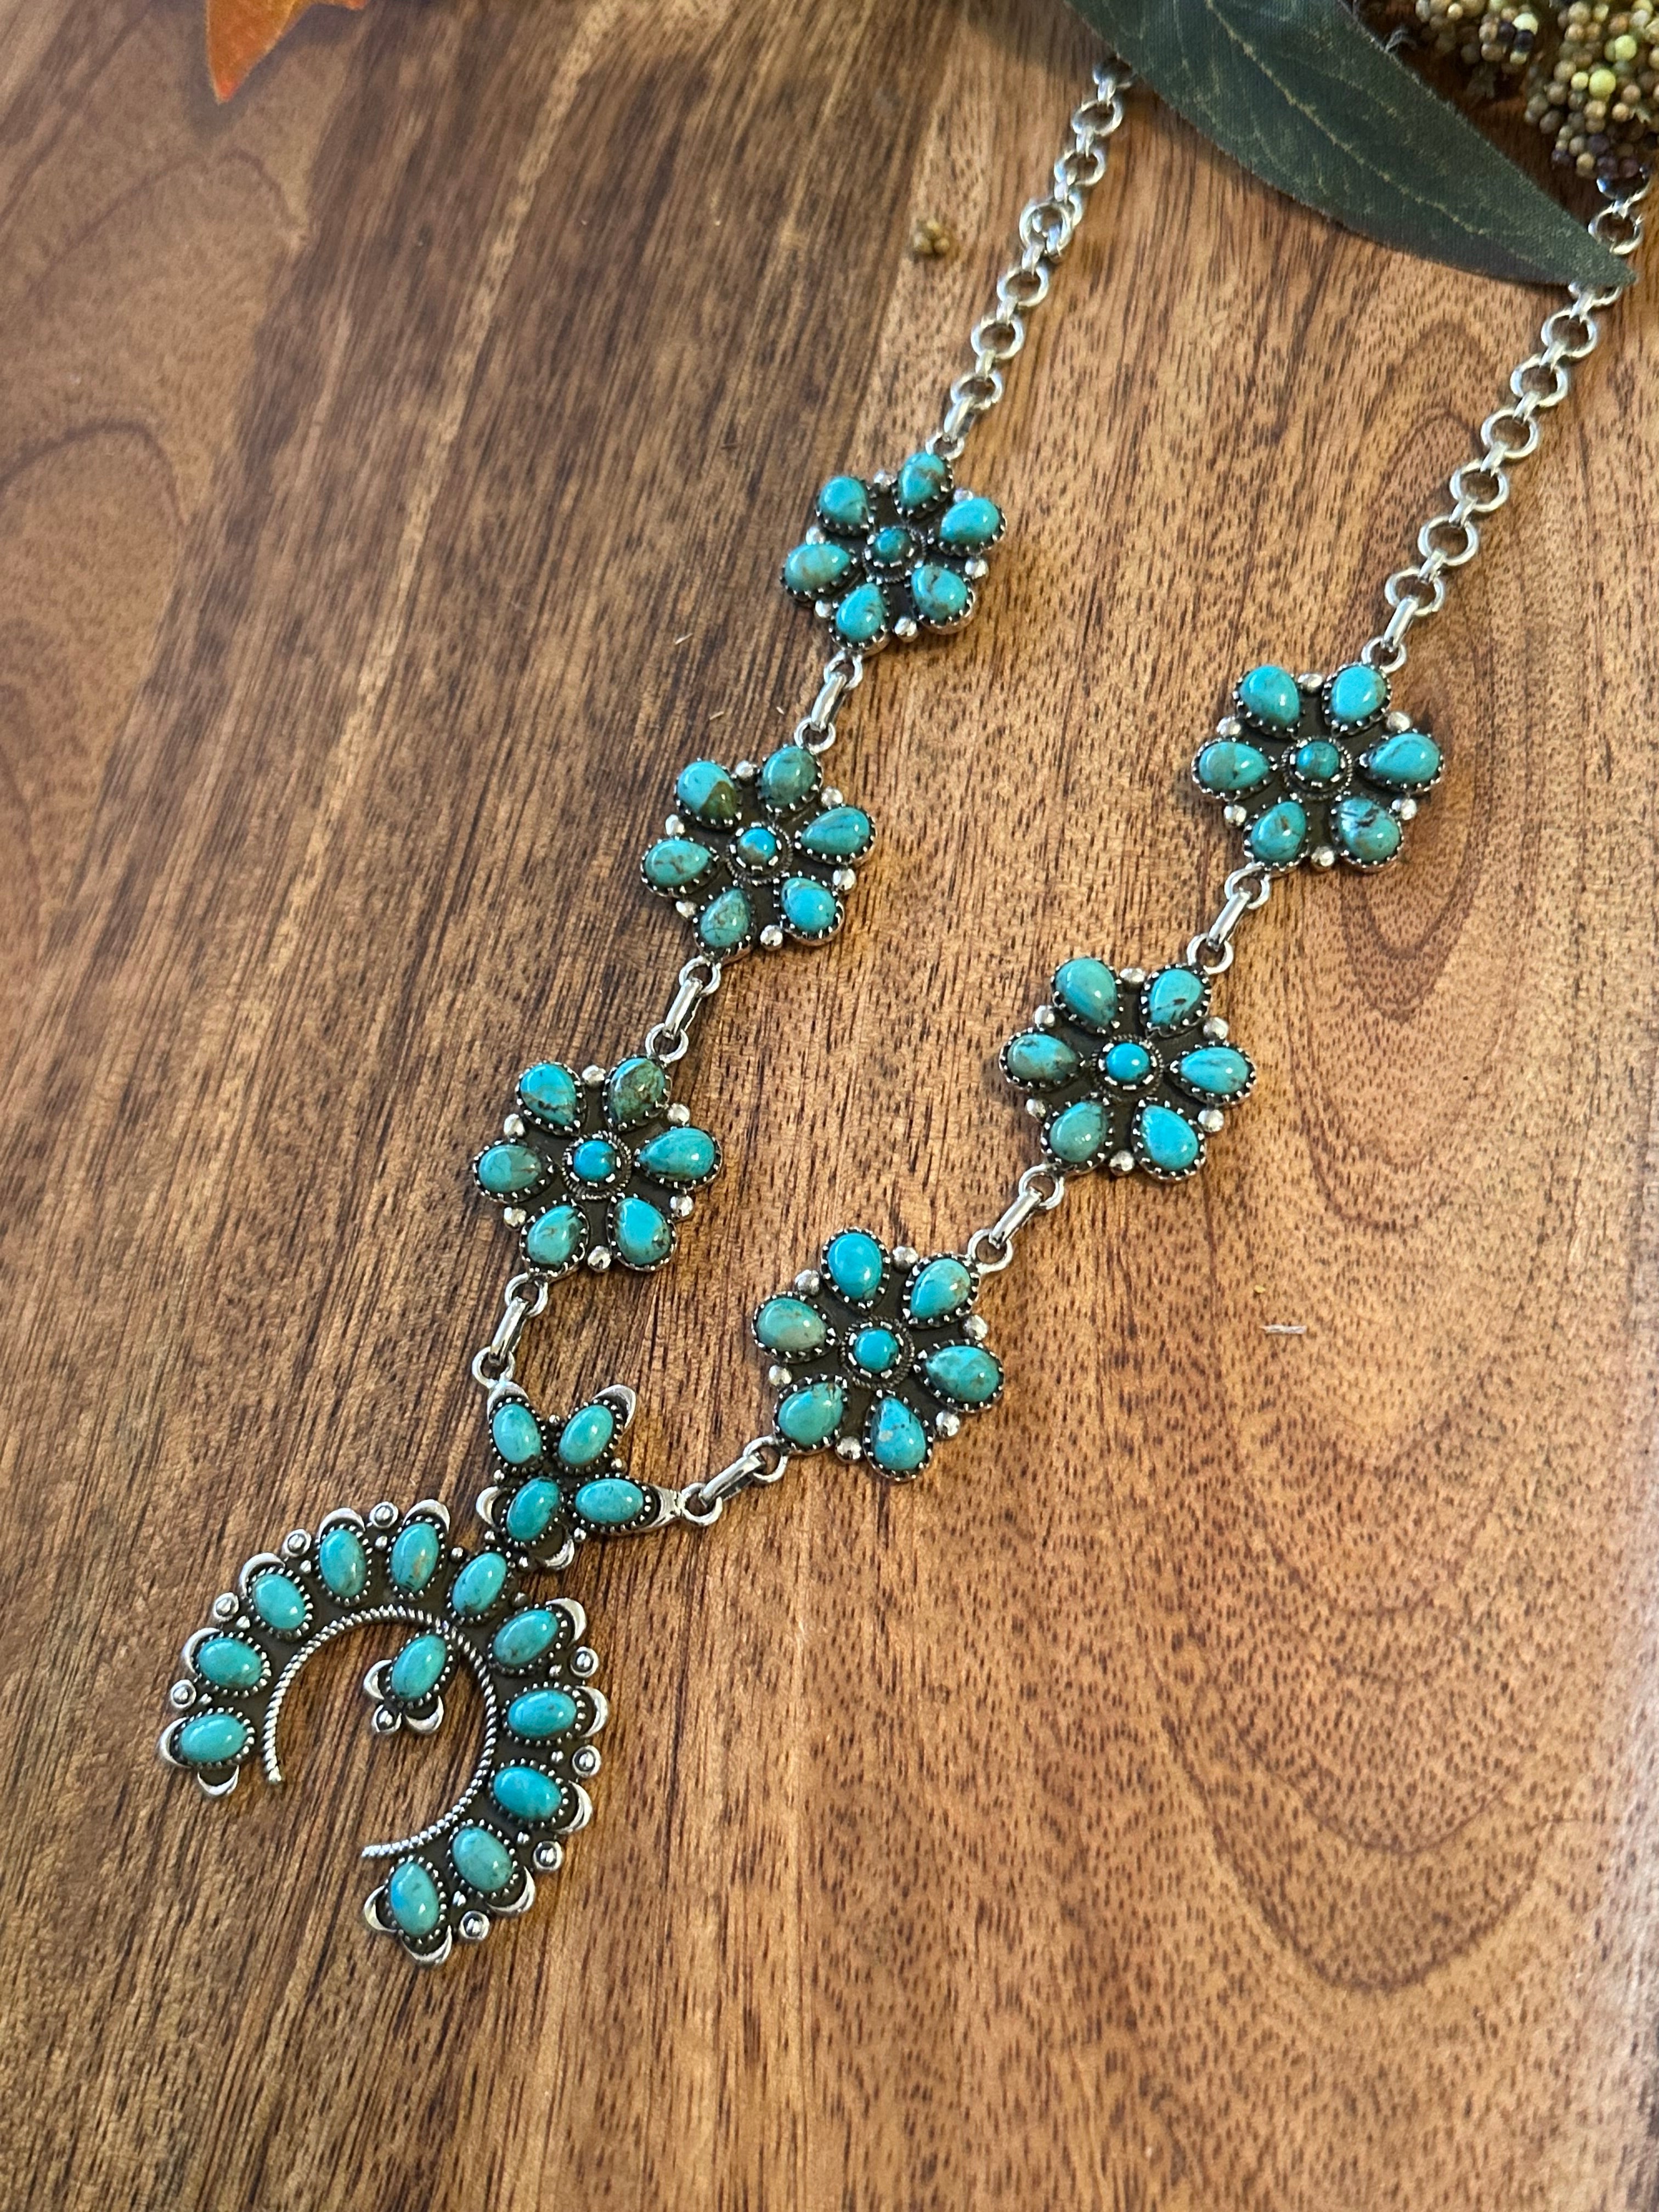 Southwest Made Kingman Turquoise & Sterling Silver Necklace Set